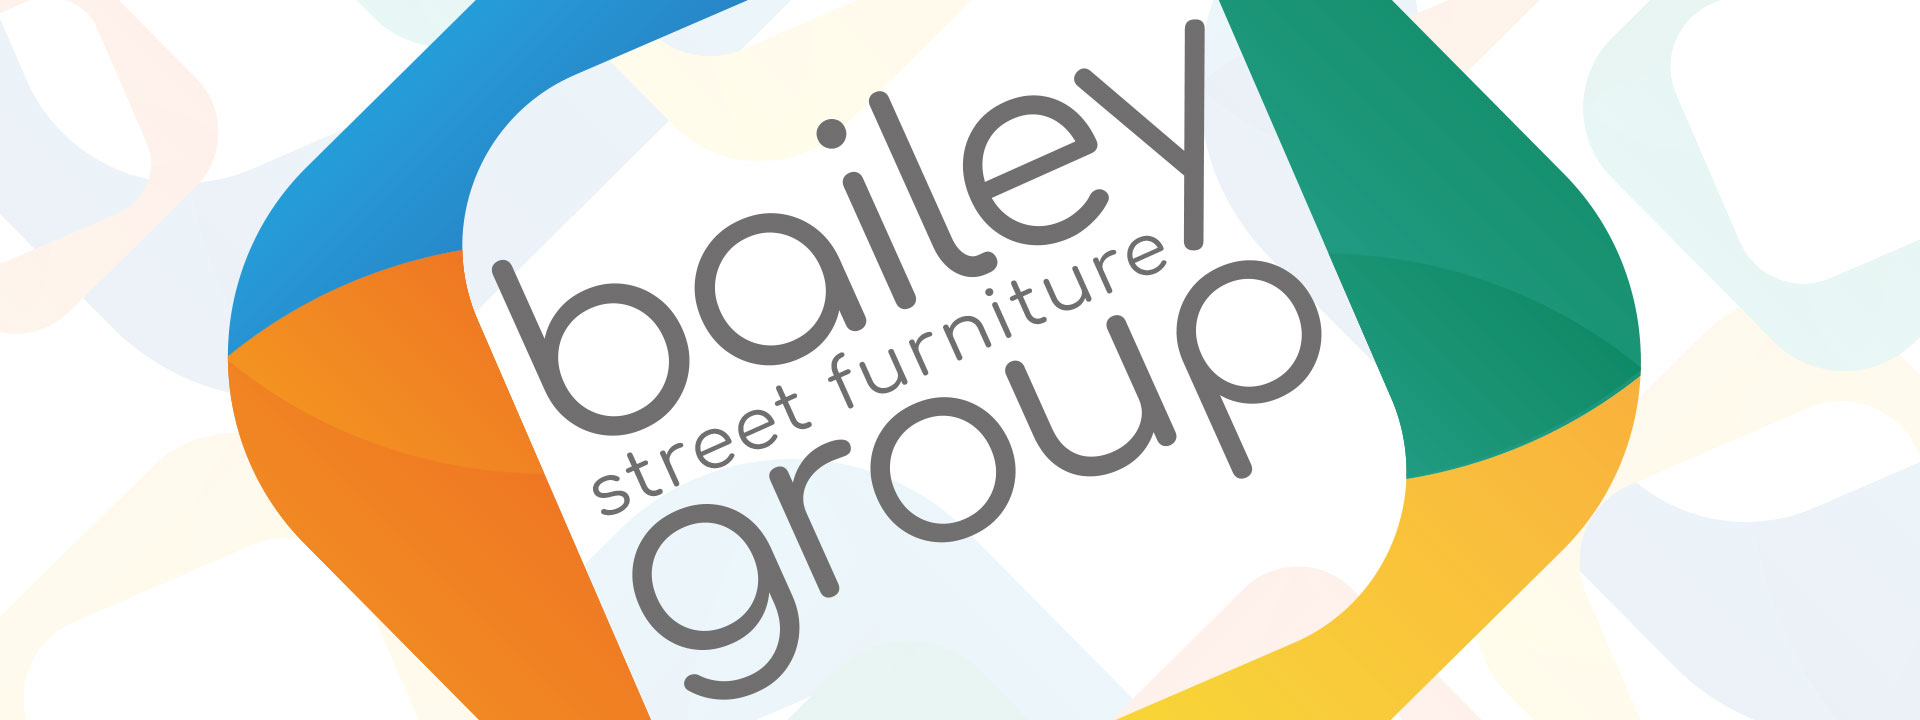 Transforming Urban Spaces with Exciting Merger of Leading Street Furniture Brands